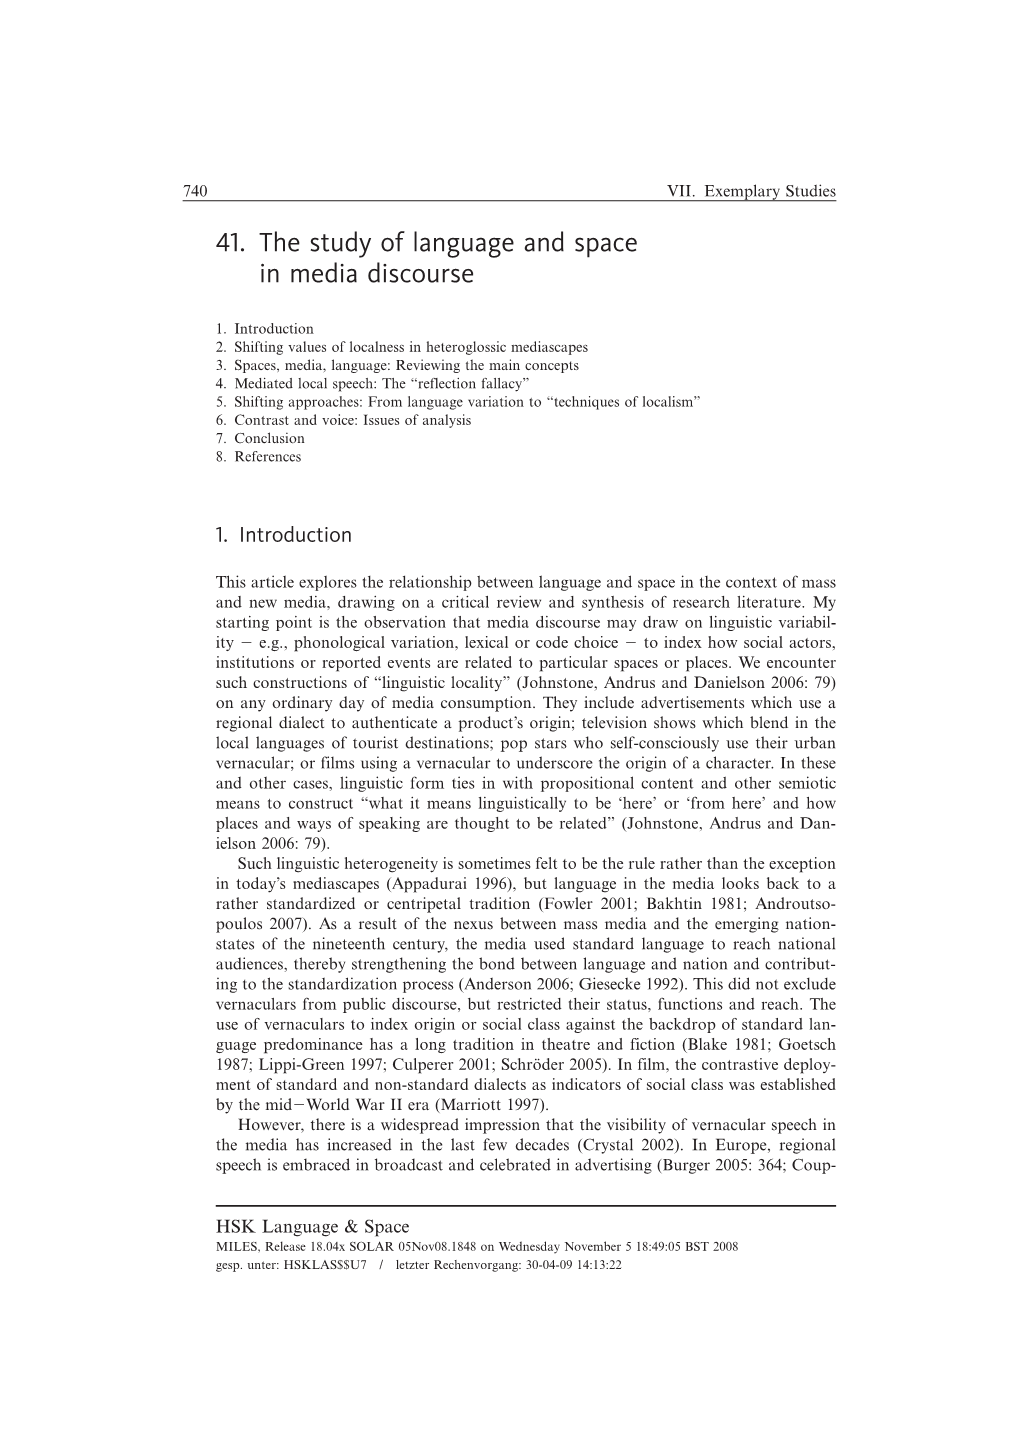 41. the Study O Language and Space in Media Discourse